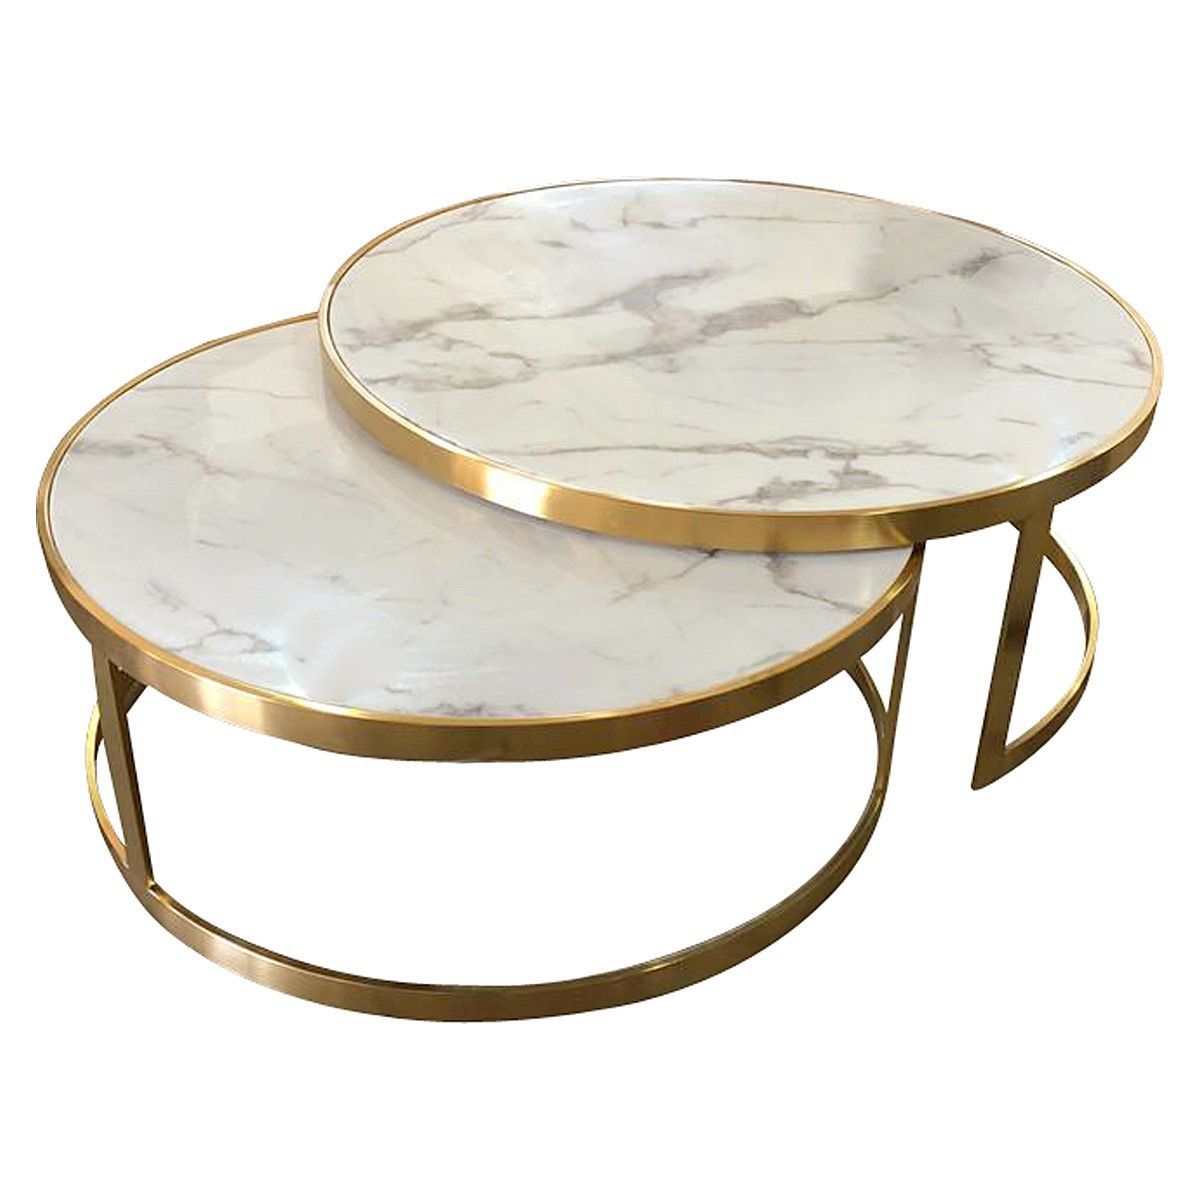 Mirabello 2 Piece Faux Marble Topped Metal Round Nesting Intended For 2020 2 Piece Modern Nesting Coffee Tables (Gallery 16 of 20)